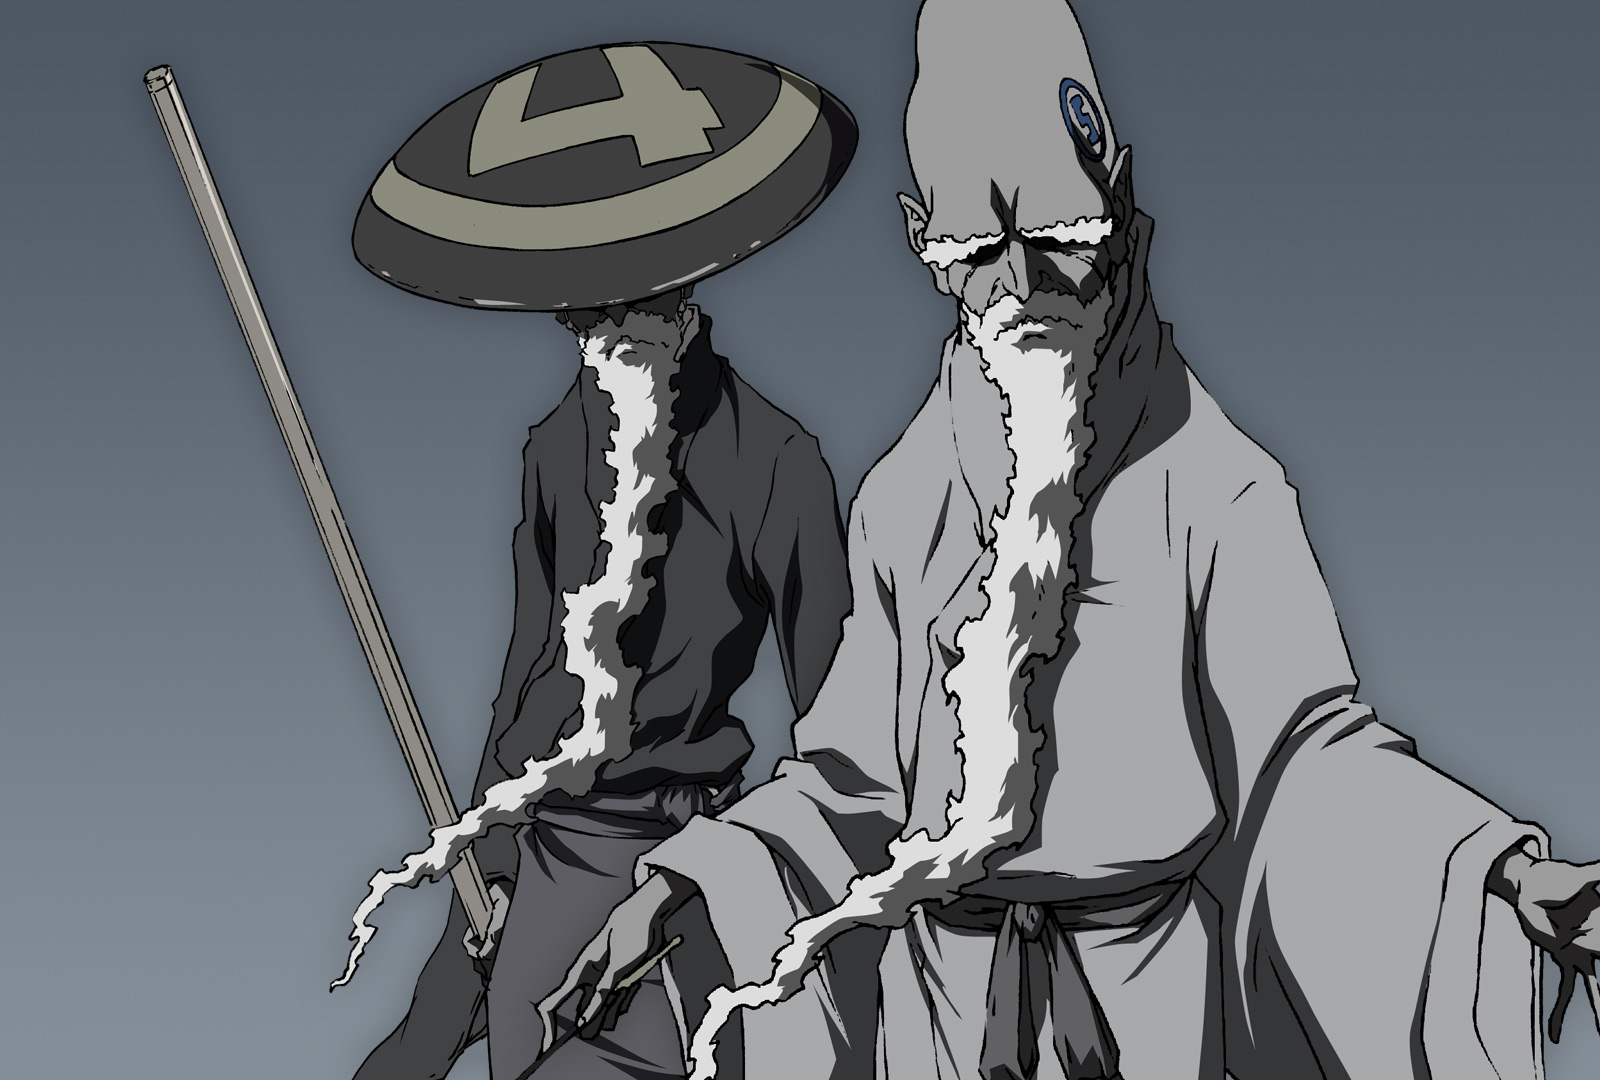 Samuel L. Jackson Teams With Indomina for “Afro Samurai” Feature – IndieWire